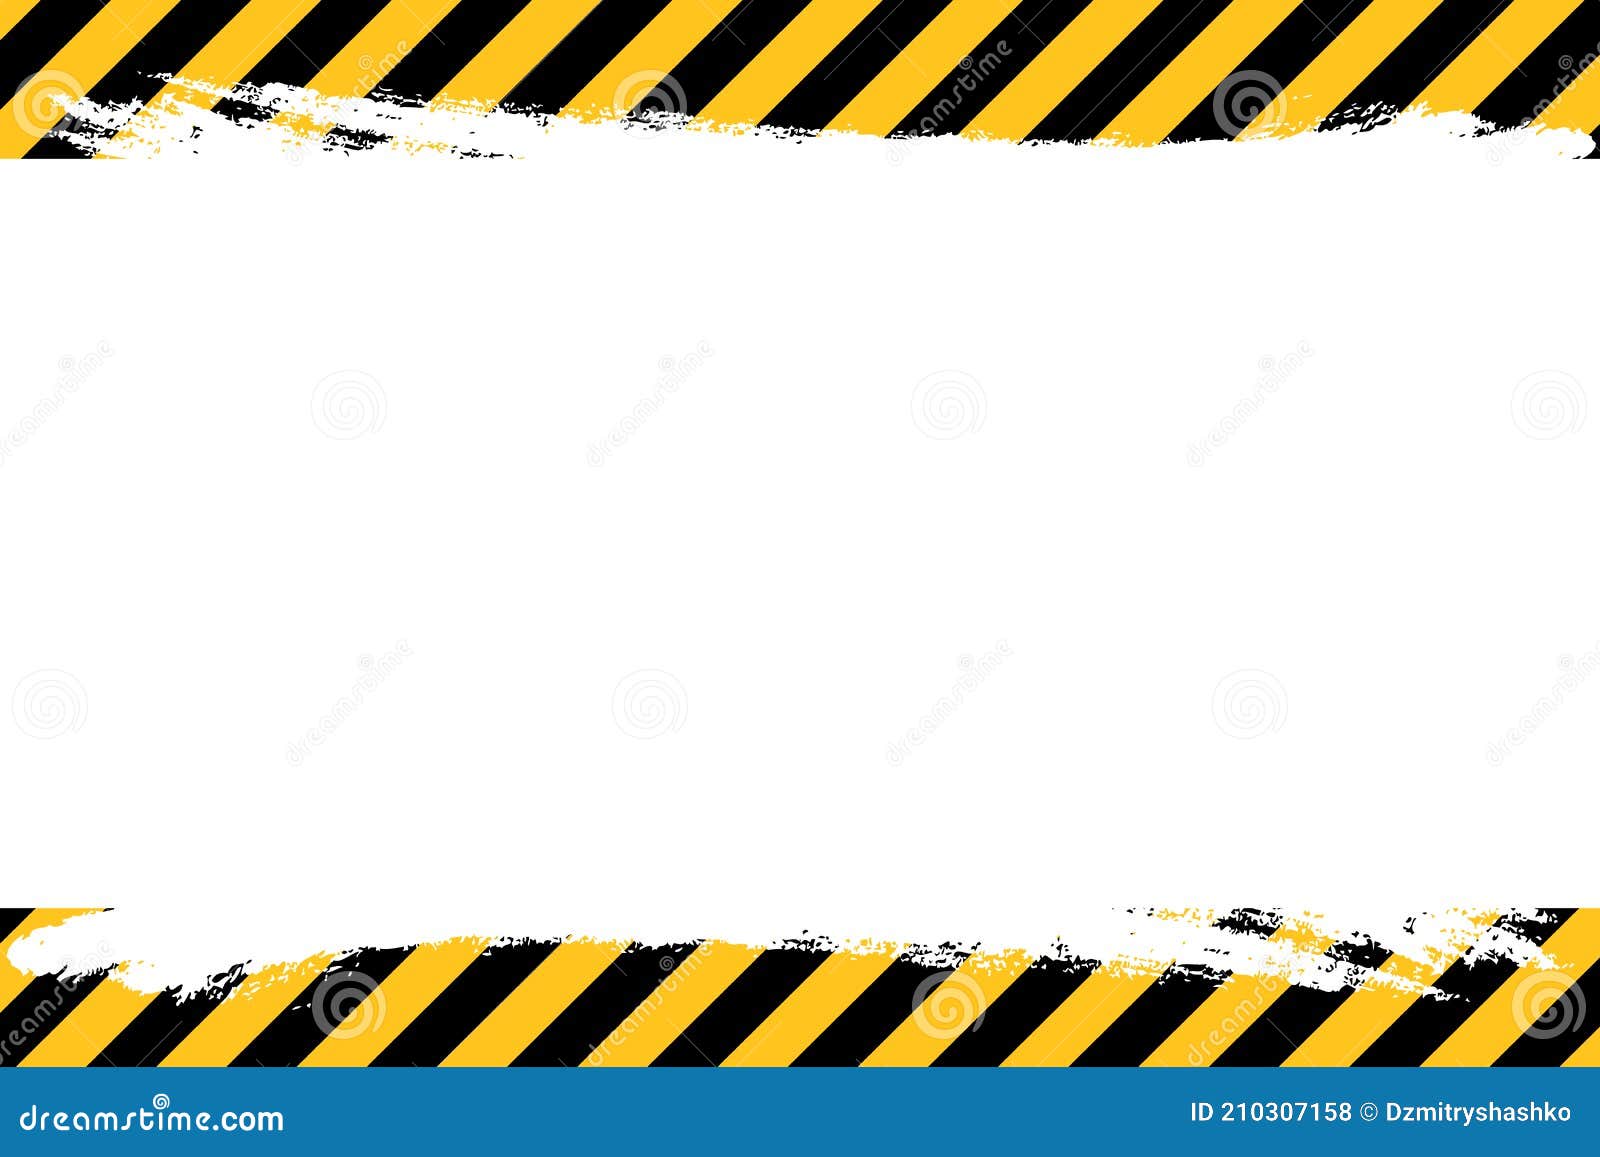 caution-tape-clipart-adhesive-tape-barricade-tape-clip-art-caution